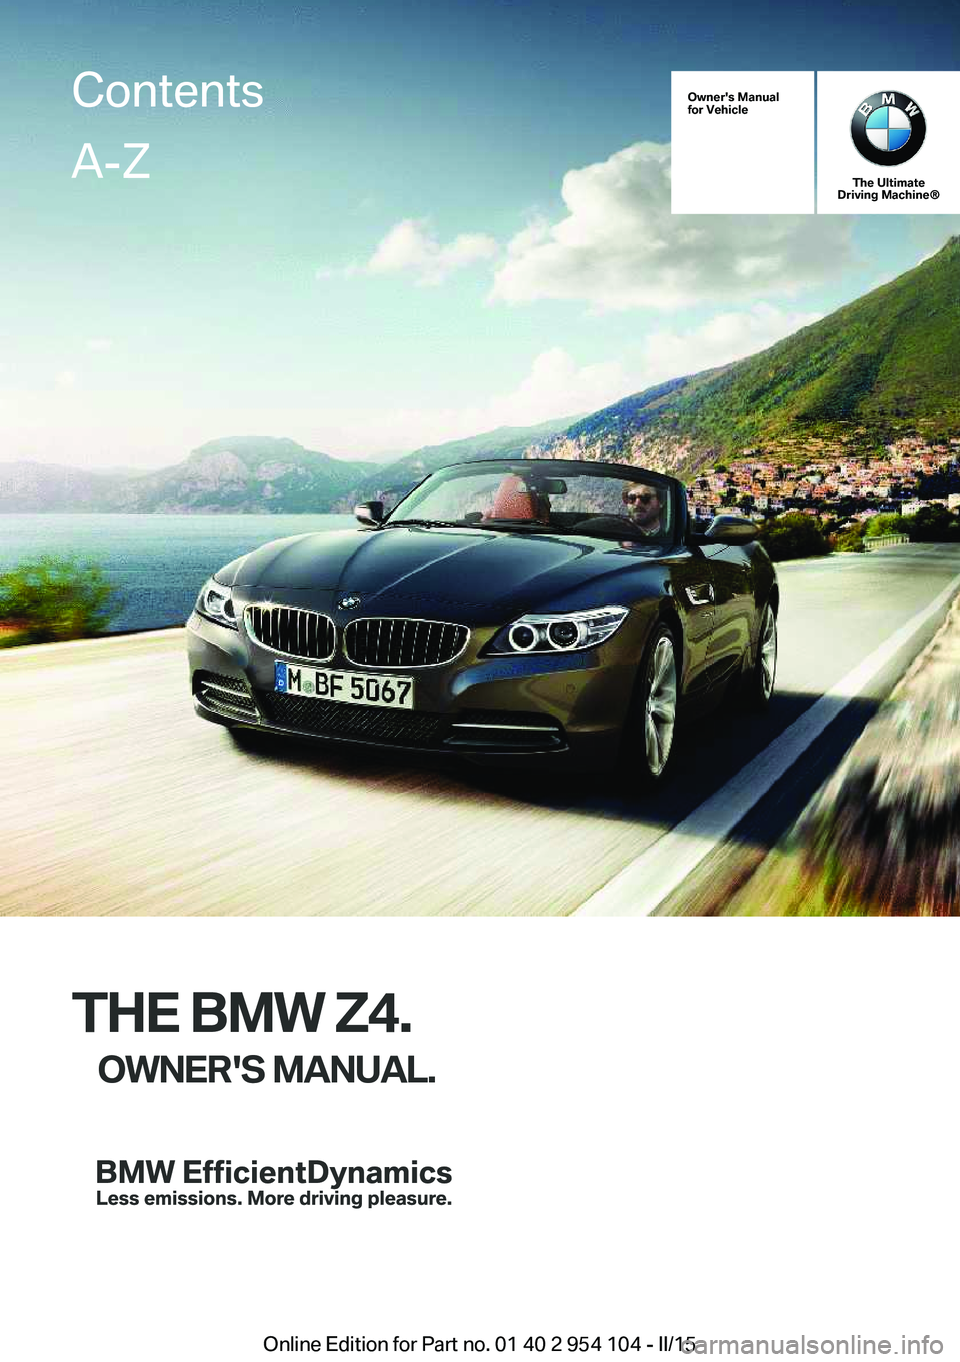 BMW Z4 SDRIVE28I 2015  Owners Manual Owner's Manual
for Vehicle
The Ultimate
Driving Machine®
THE BMW Z4.
OWNER'S MANUAL.
ContentsA-Z
Online Edition for Part no. 01 40 2 954 104 - II/15   